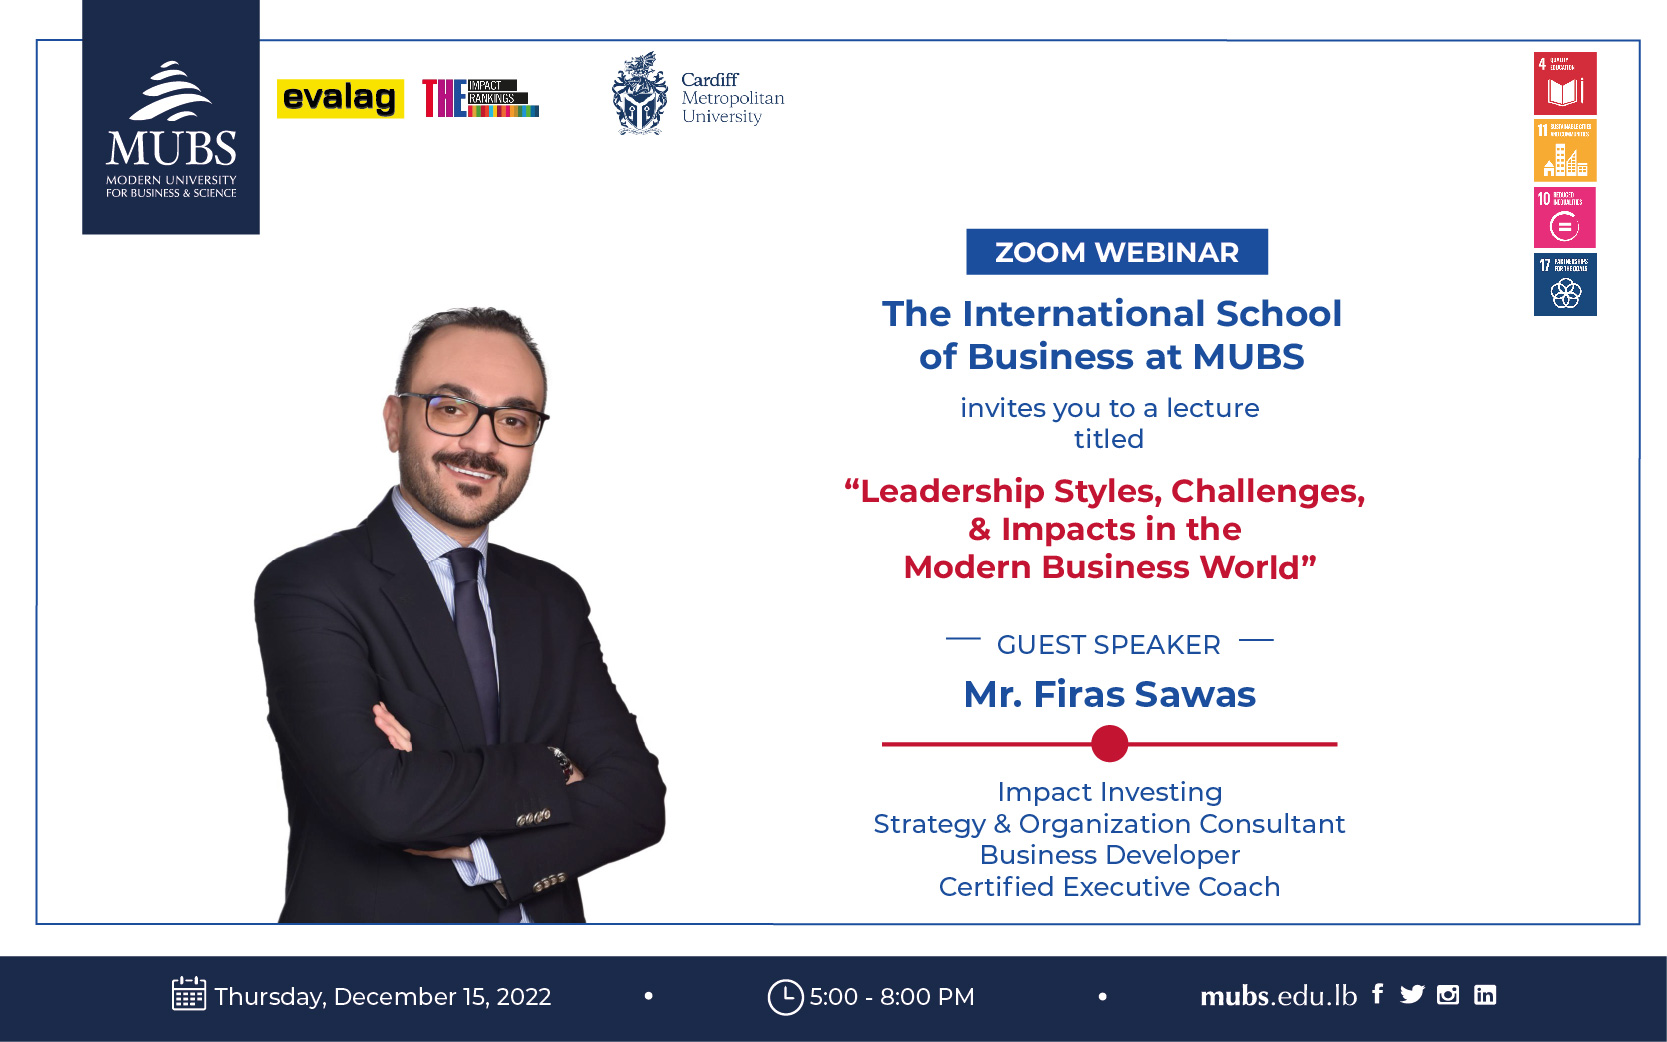 The International School of Business at MUBS Hosts the “Leadership Styles, Challenges, & Impacts in the Modern Business World” Webinar 